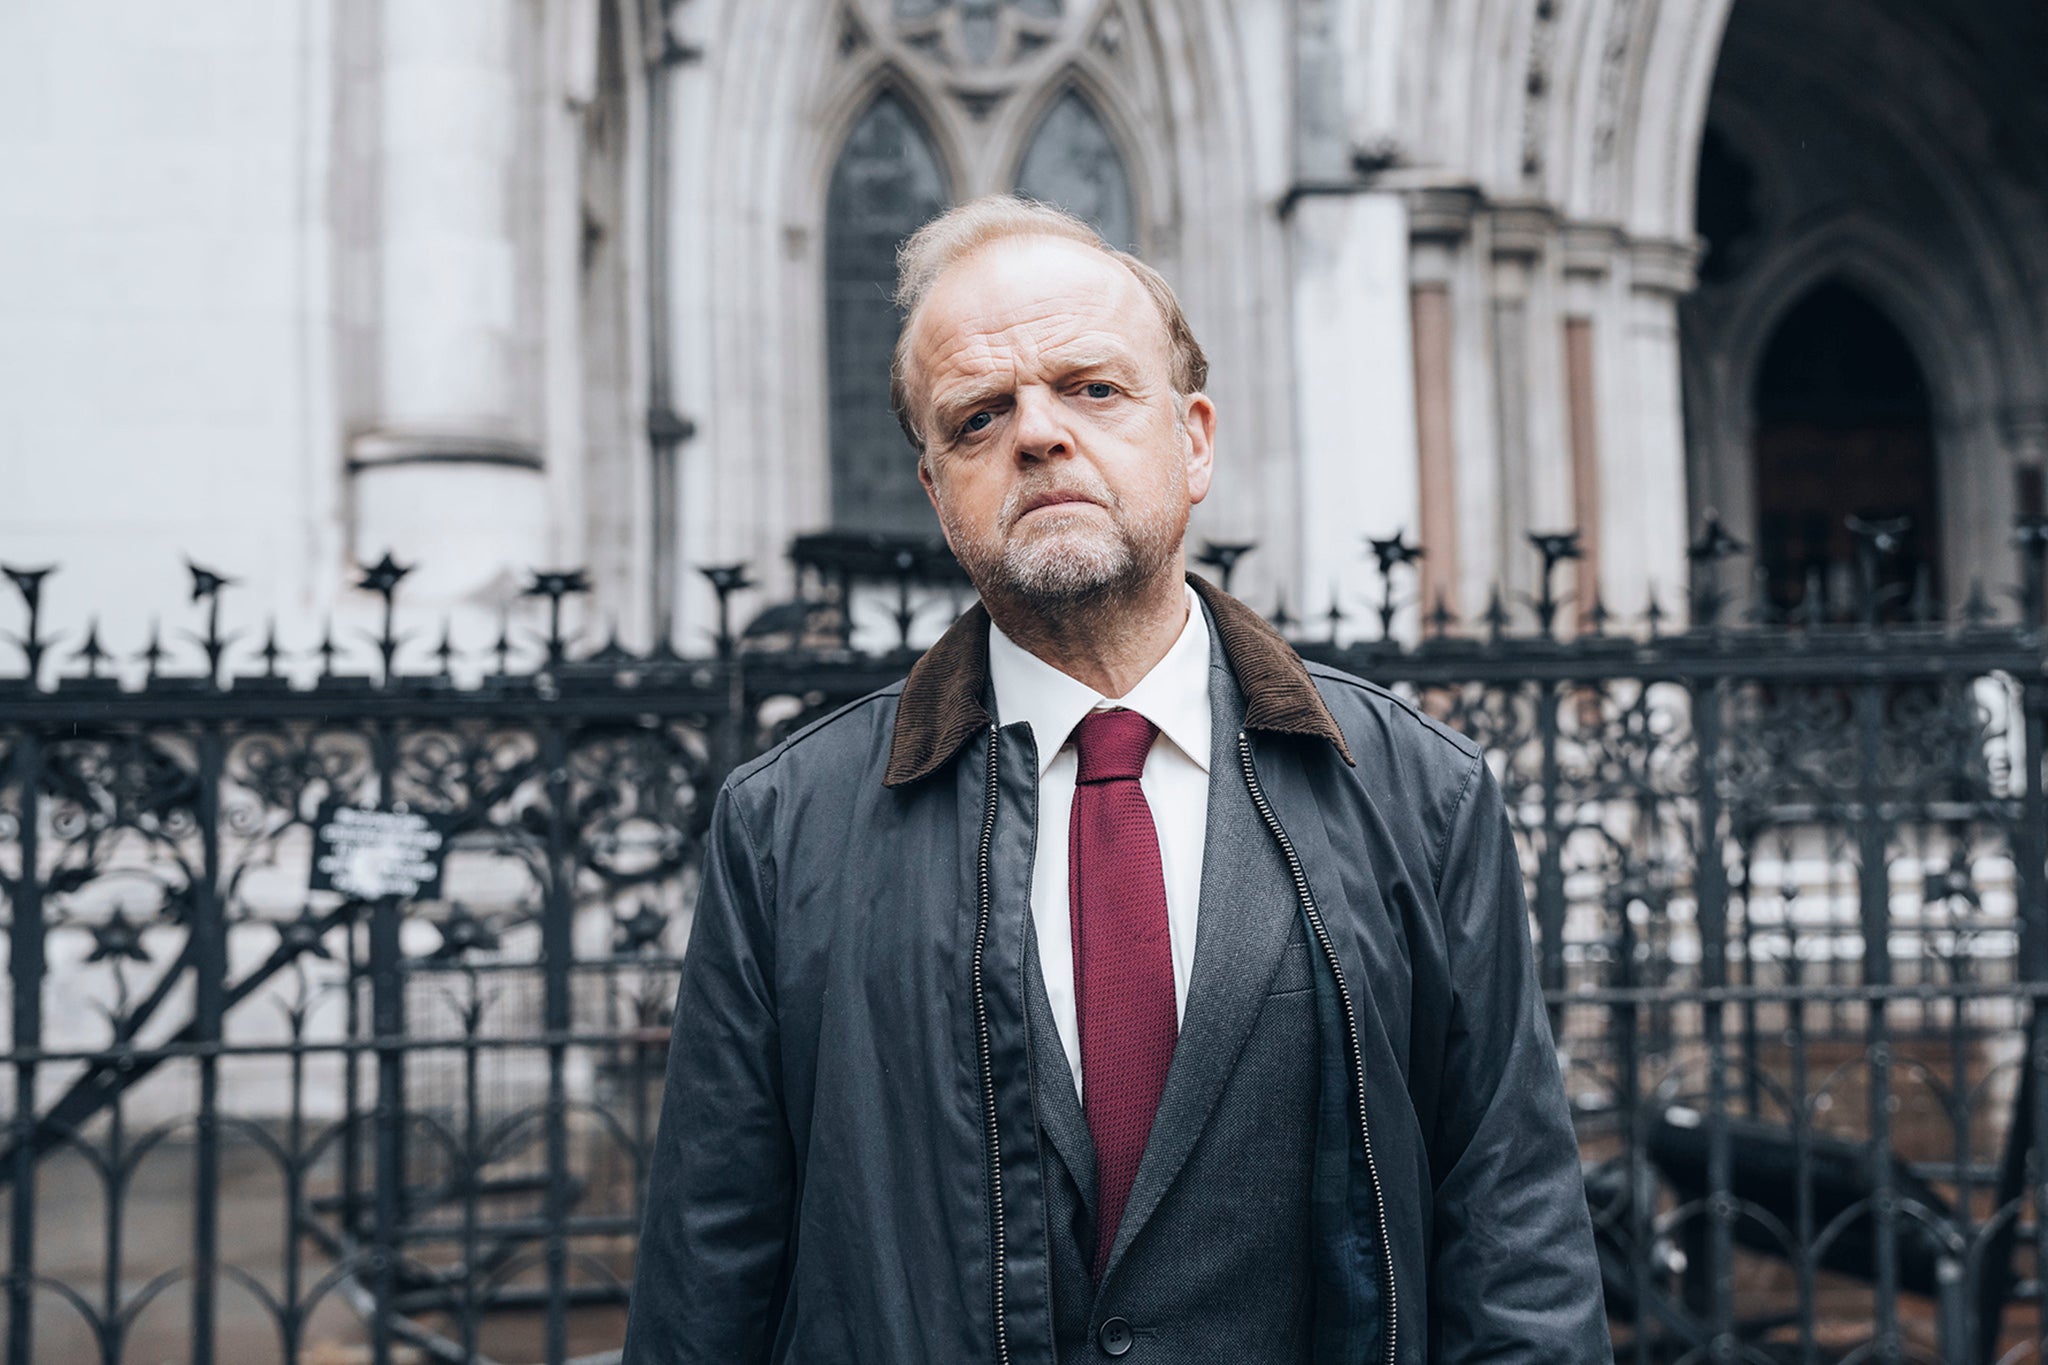 Toby Jones as Alan Bates in the ITV drama which has got the scandal back in the headlines